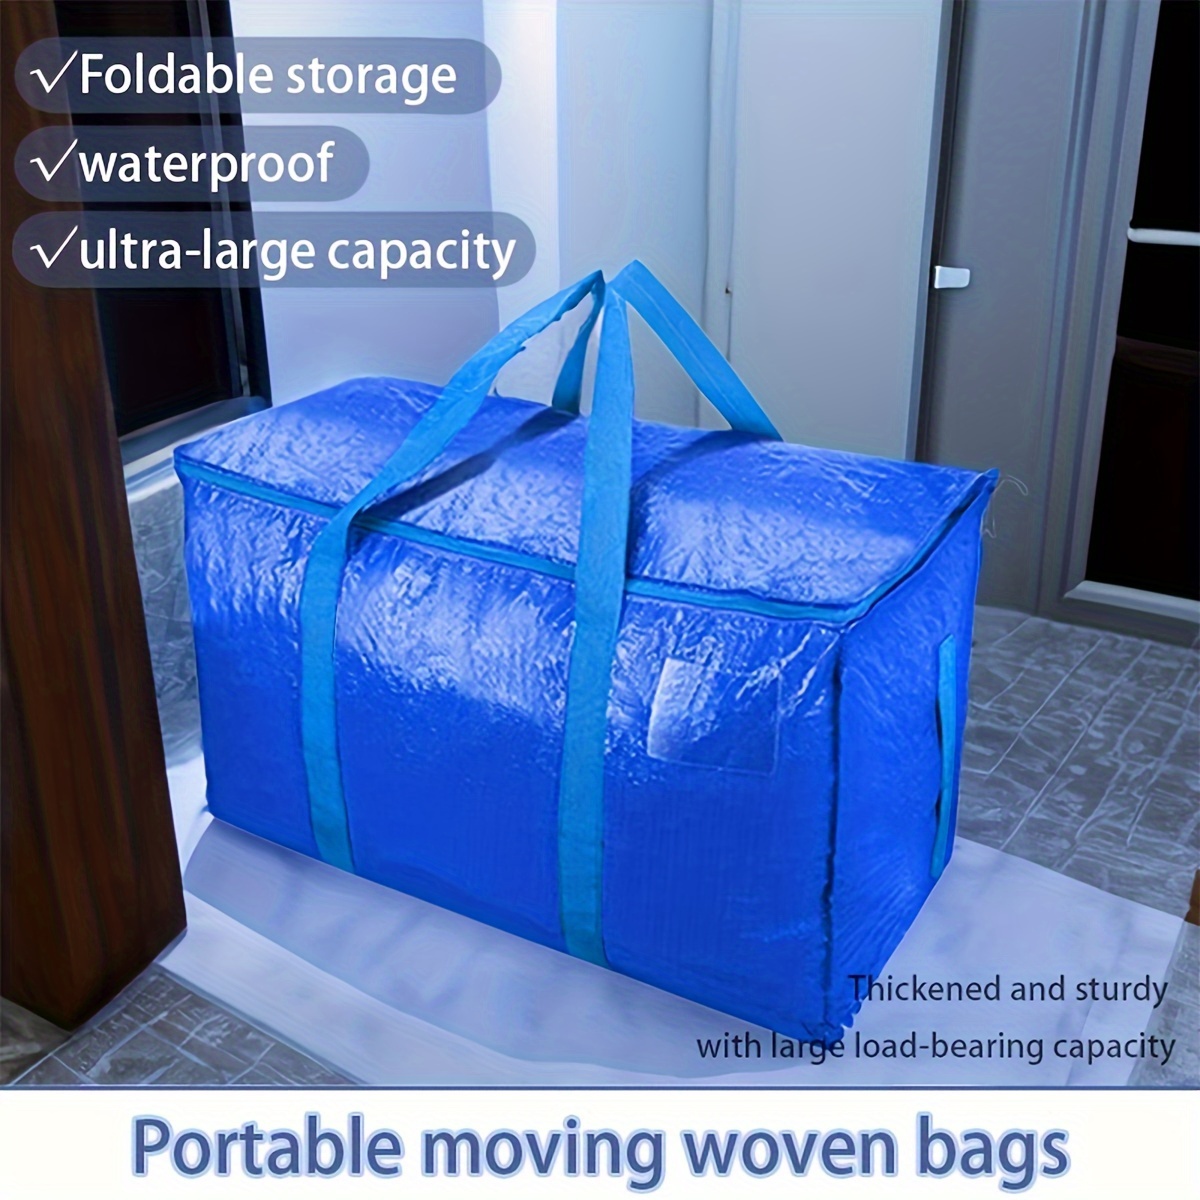 Large Capacity Moving Bag With Zippers & Carrying Handle, Heavy Duty Storage  Tote For Space Saving